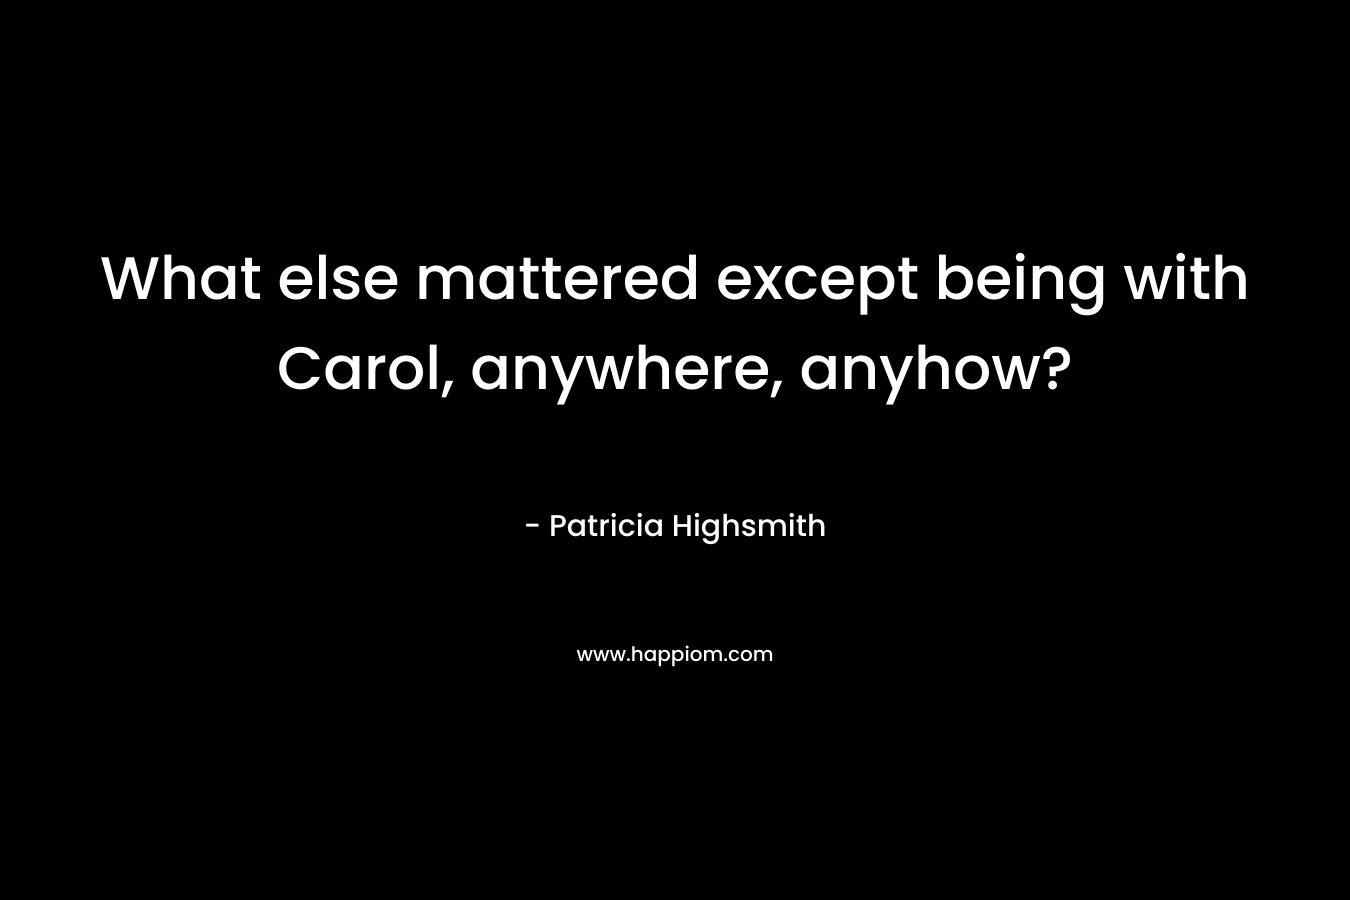 What else mattered except being with Carol, anywhere, anyhow? – Patricia Highsmith